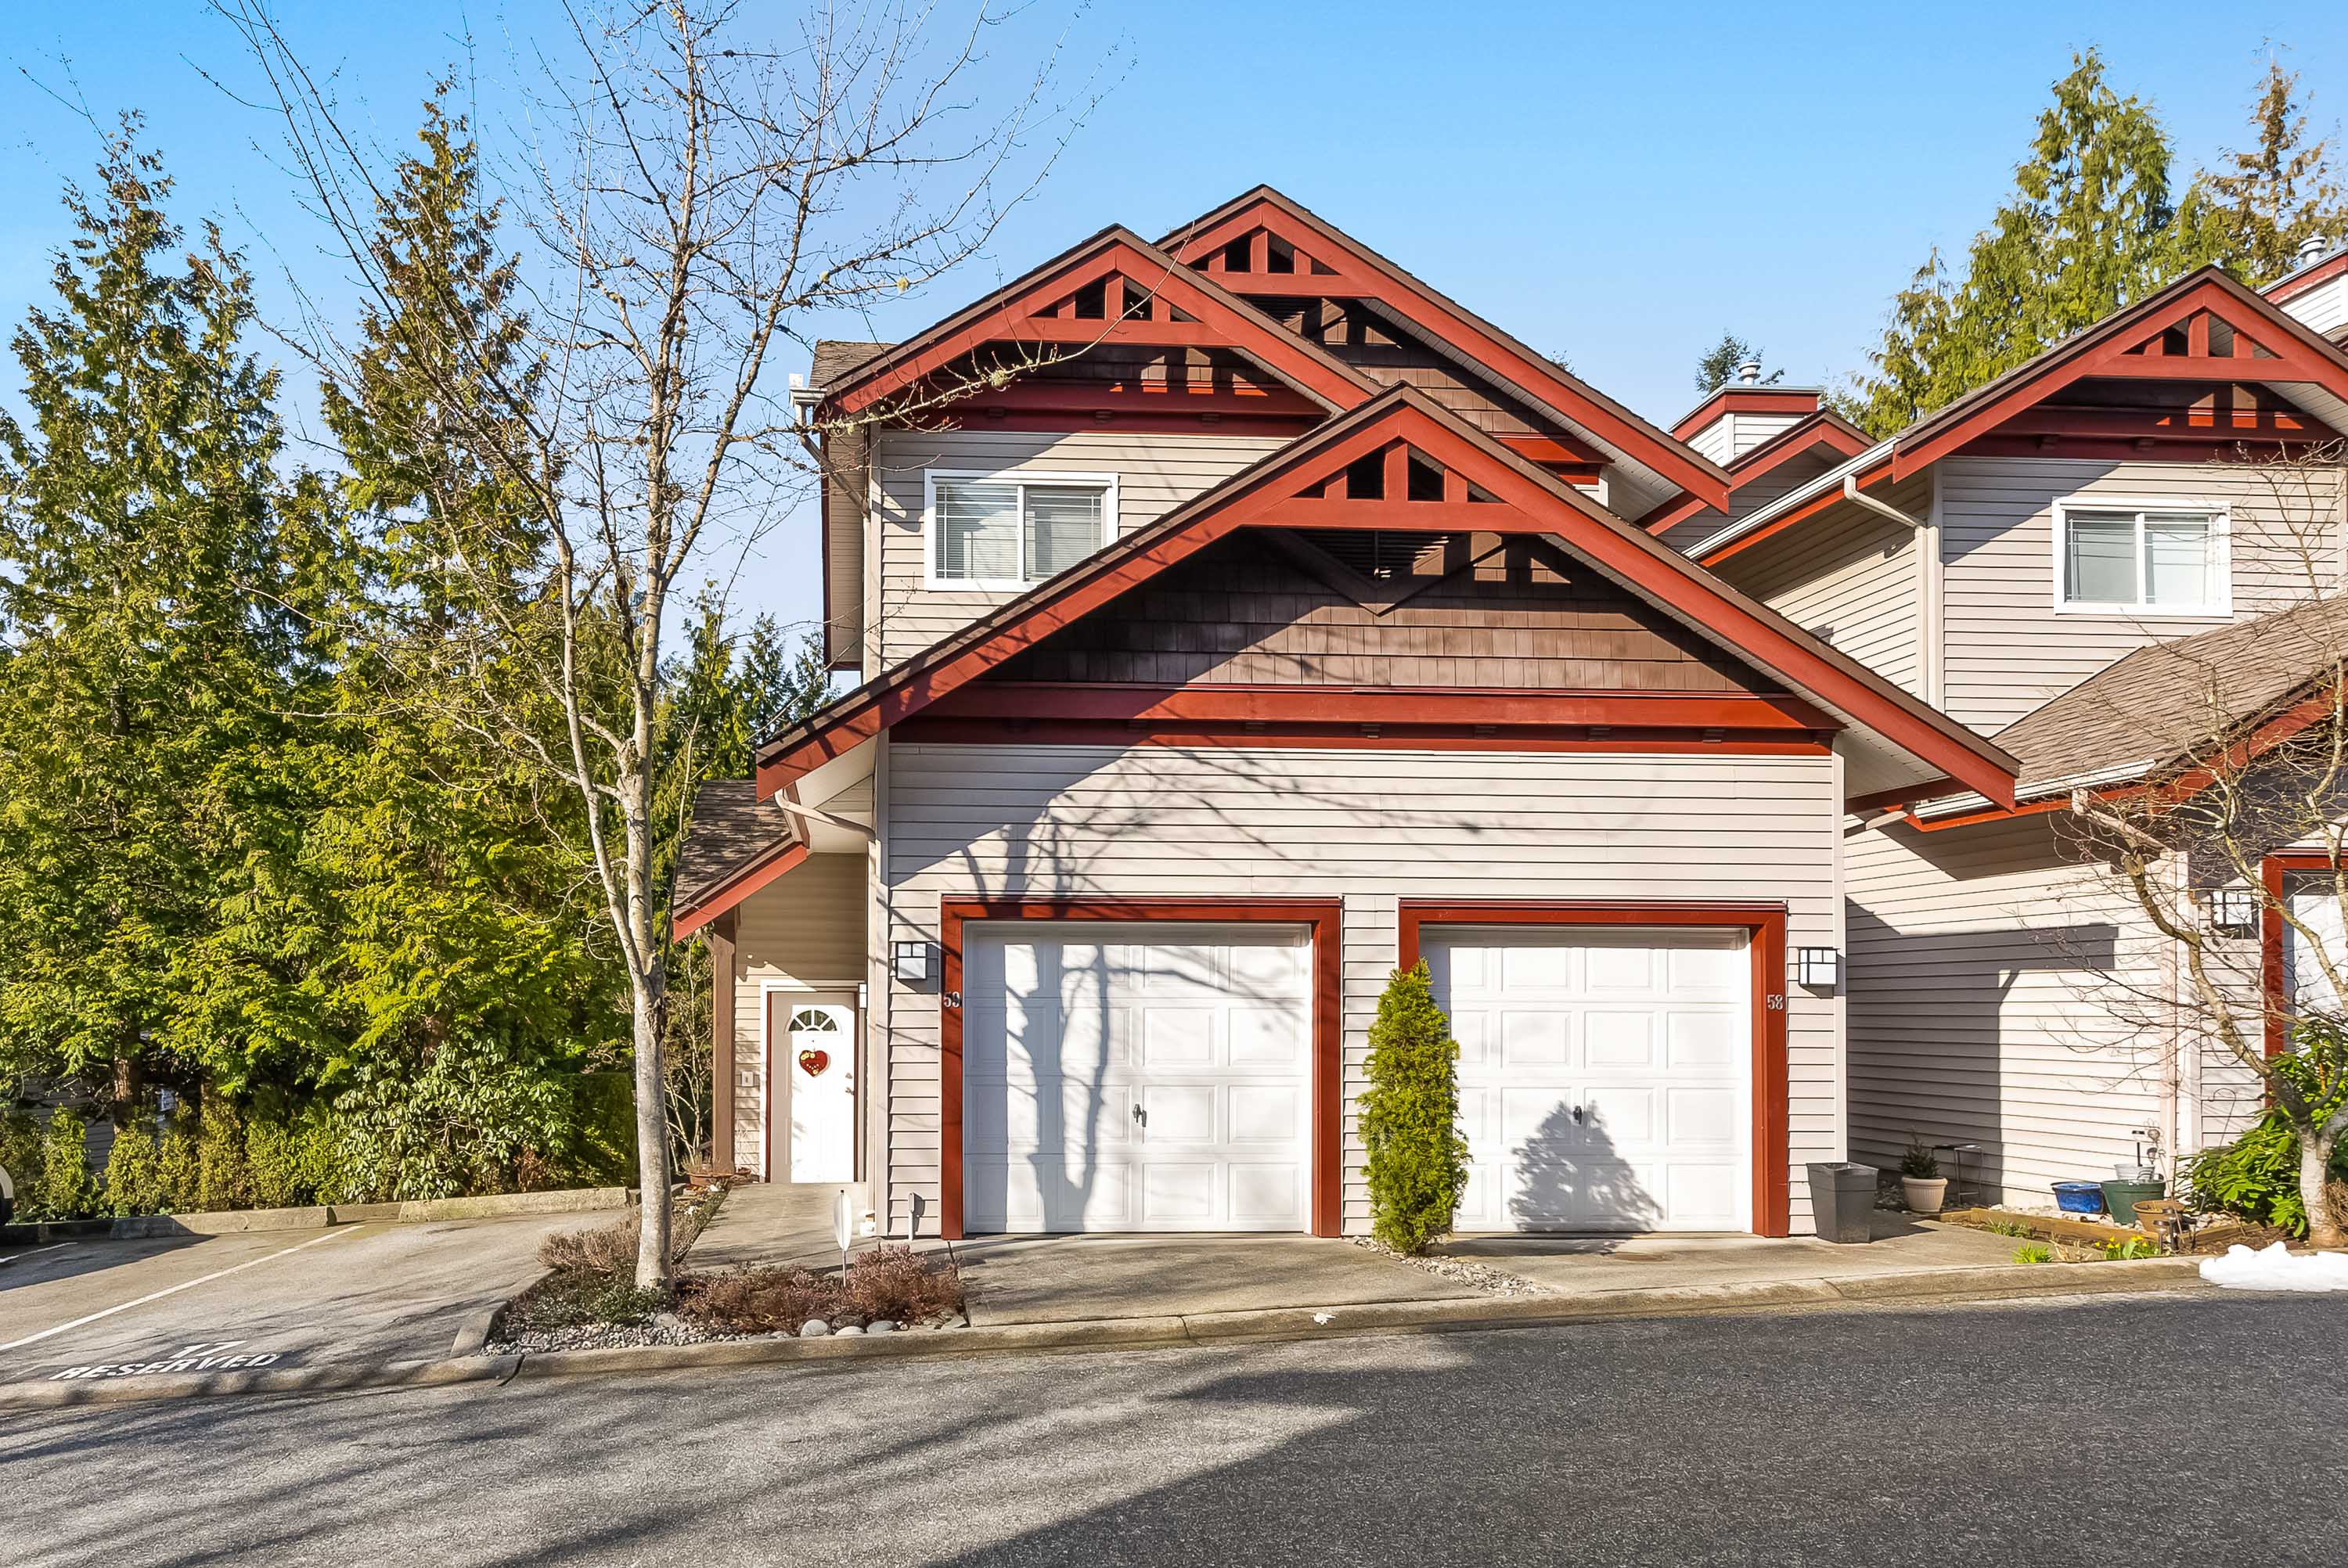 59 - 15 Forest Park Way, Port Moody